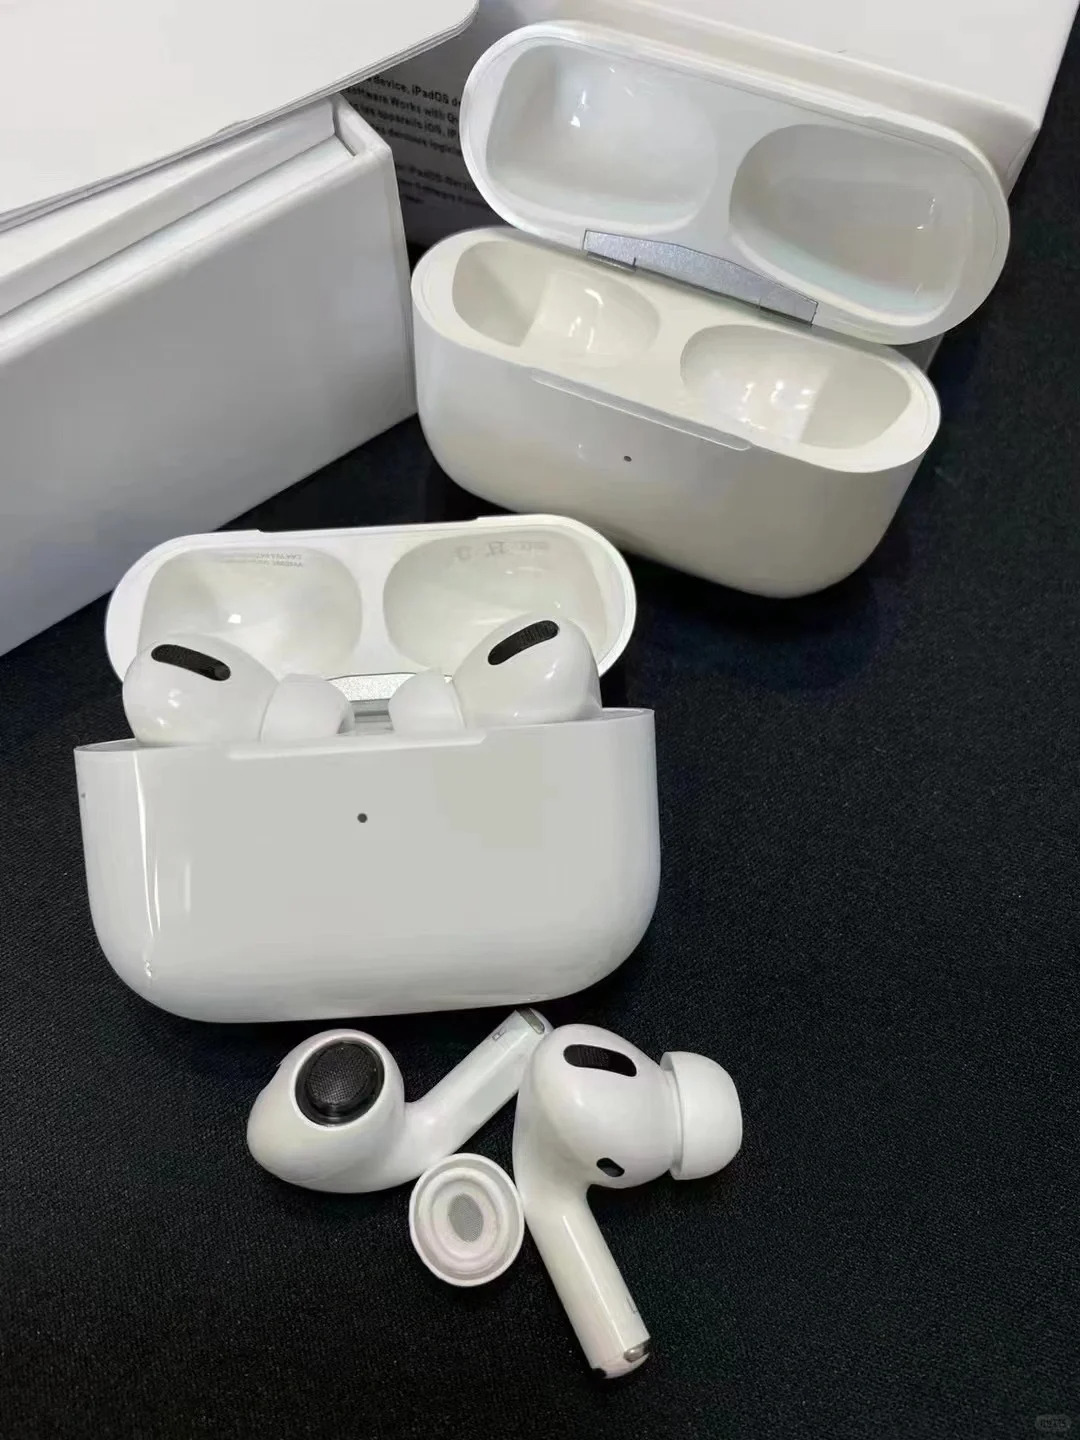 New*Apple AirPods Pro 1. Generation With Earphone Earbuds Wireless Charging Case